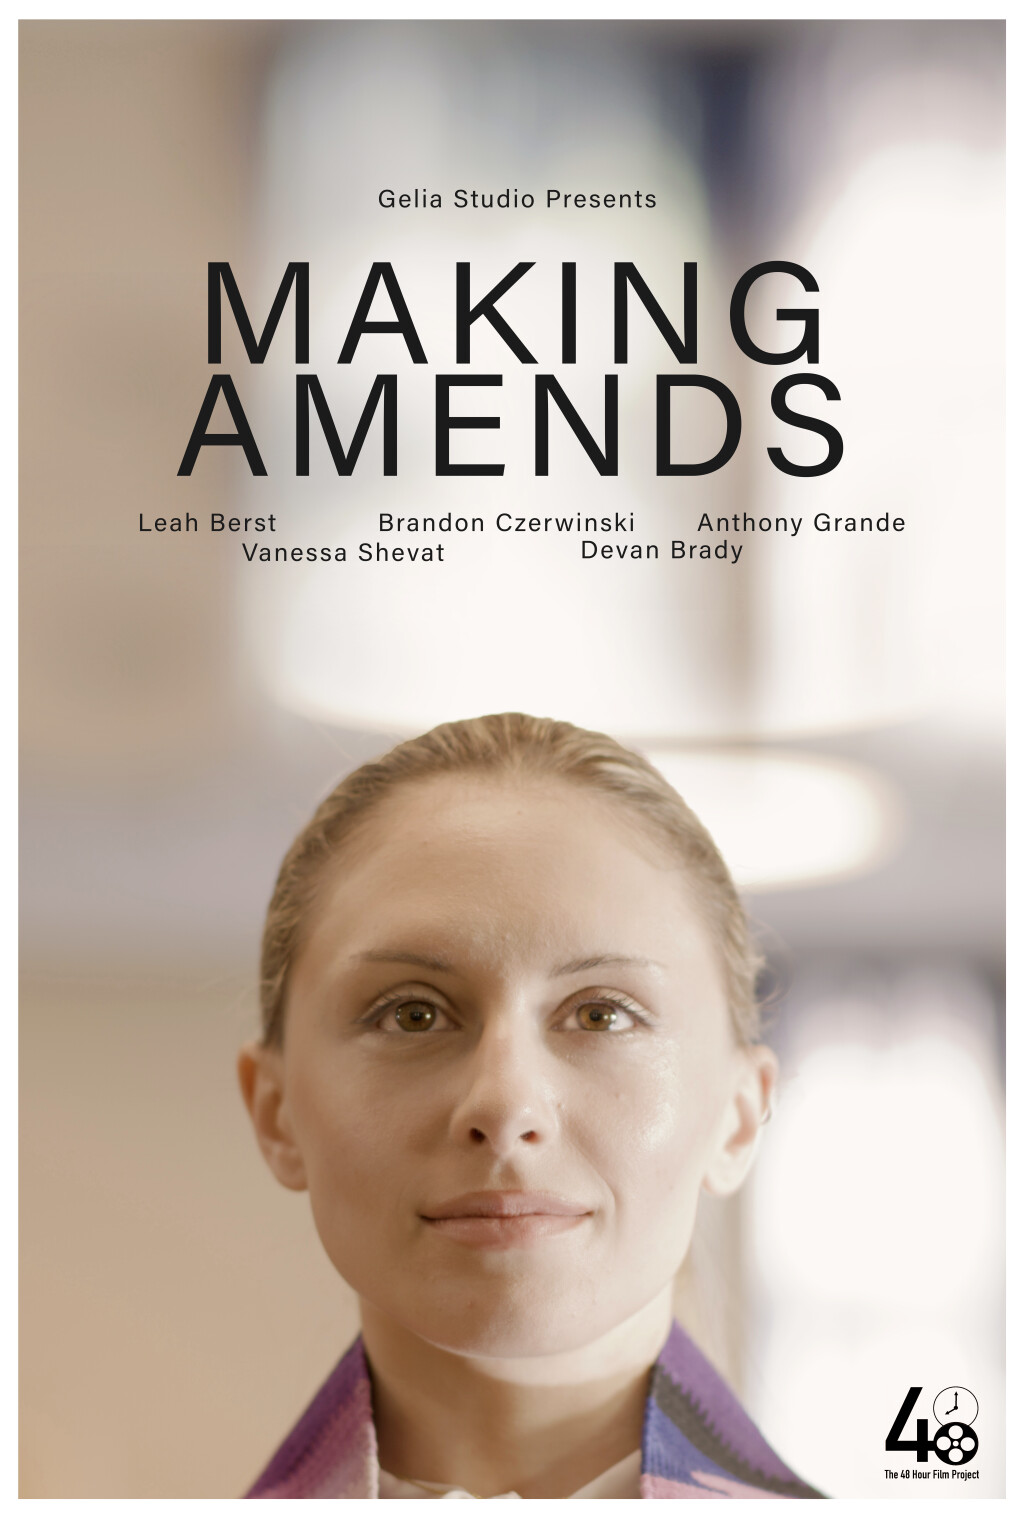 Filmposter for Making Amends